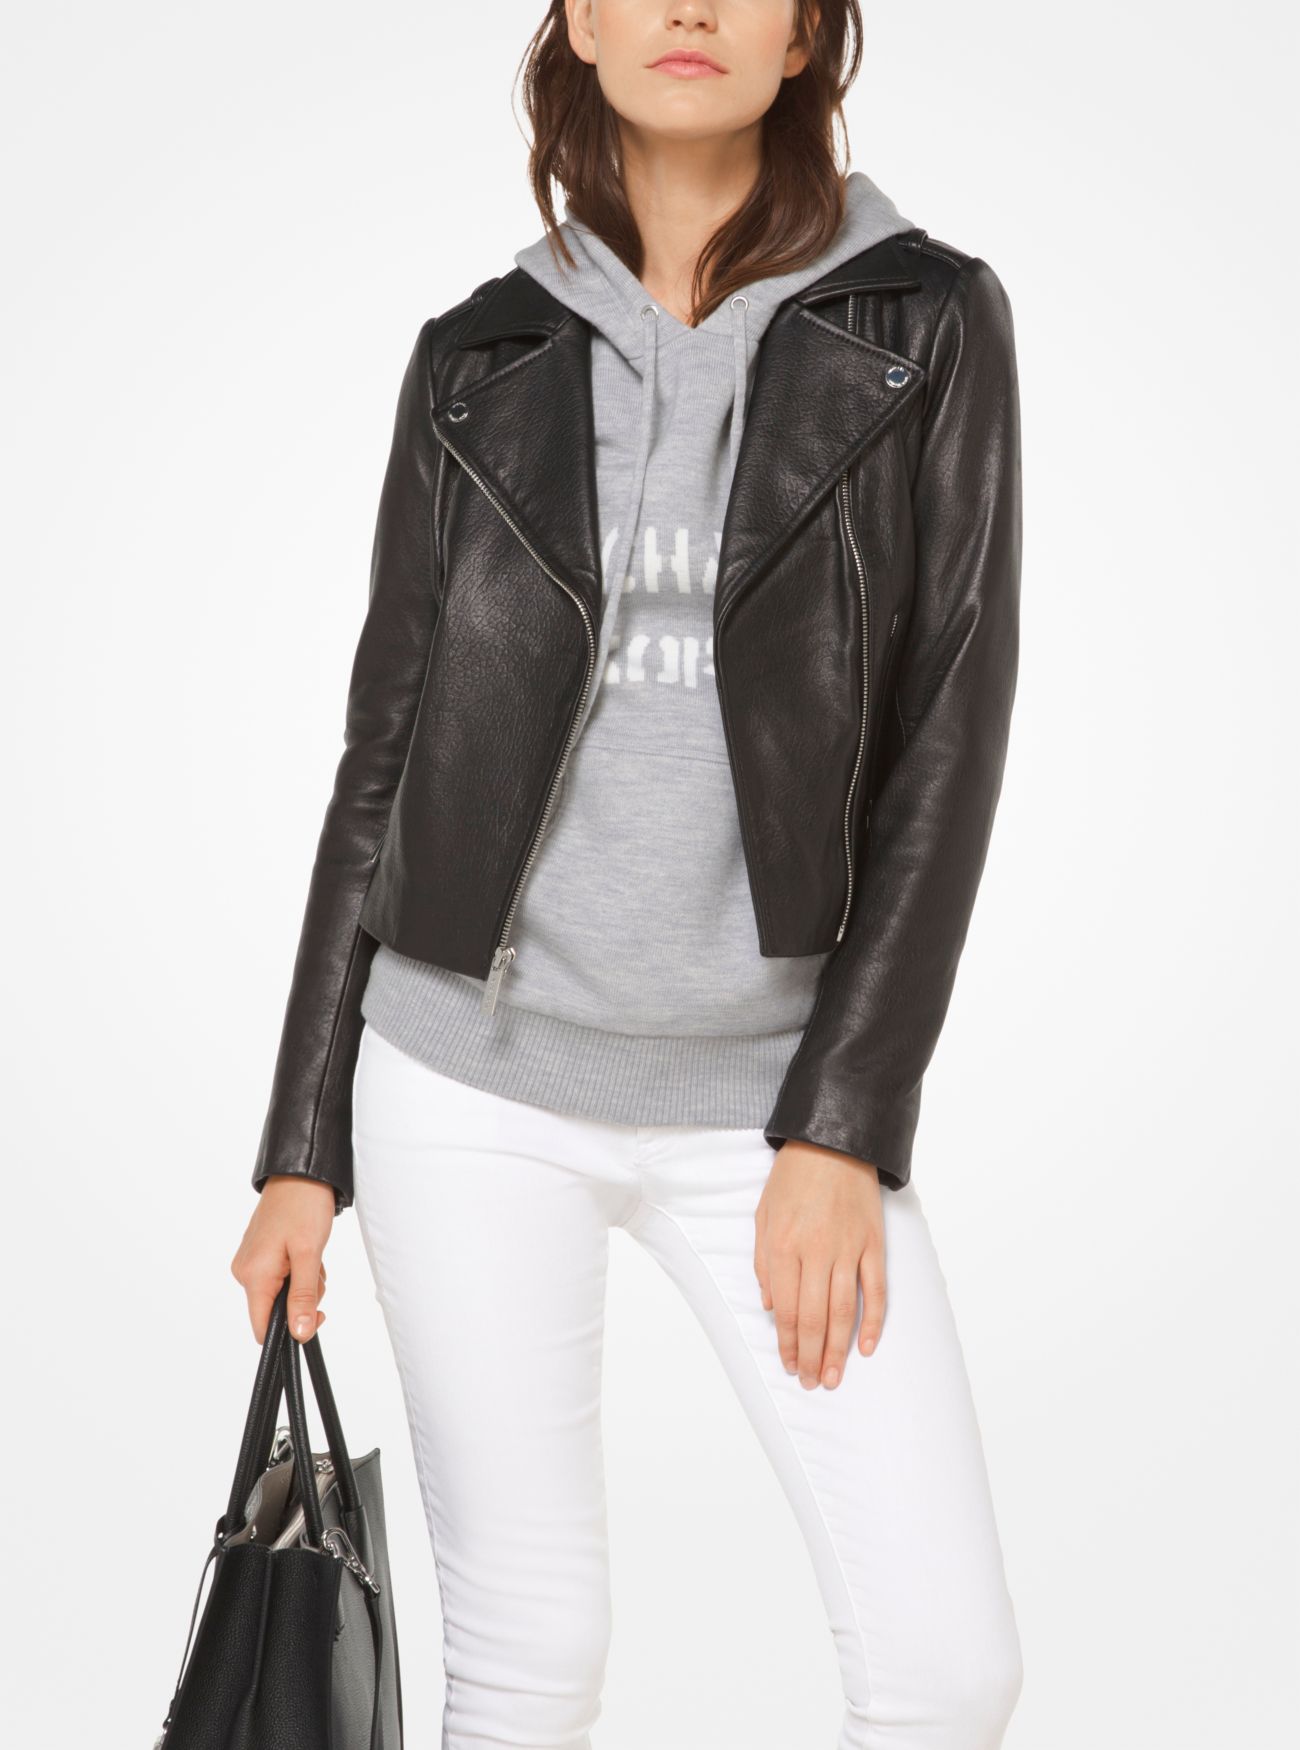 Michael Kors Layered Looks for Cooler Weather